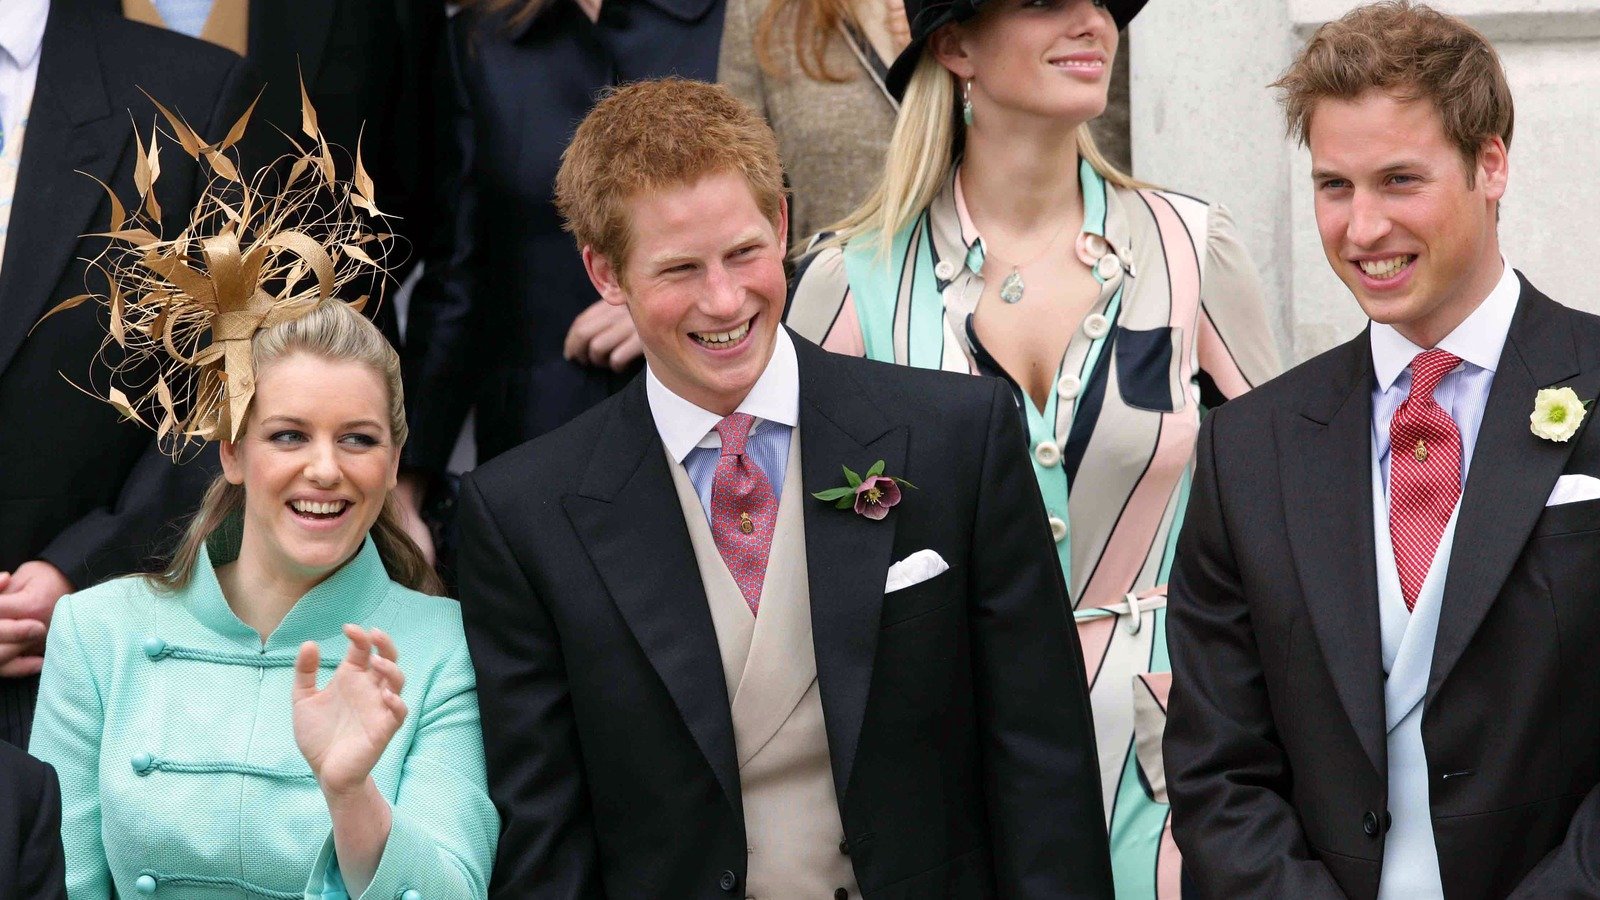 The Truth About Prince William And Prince Harry's Stepsister